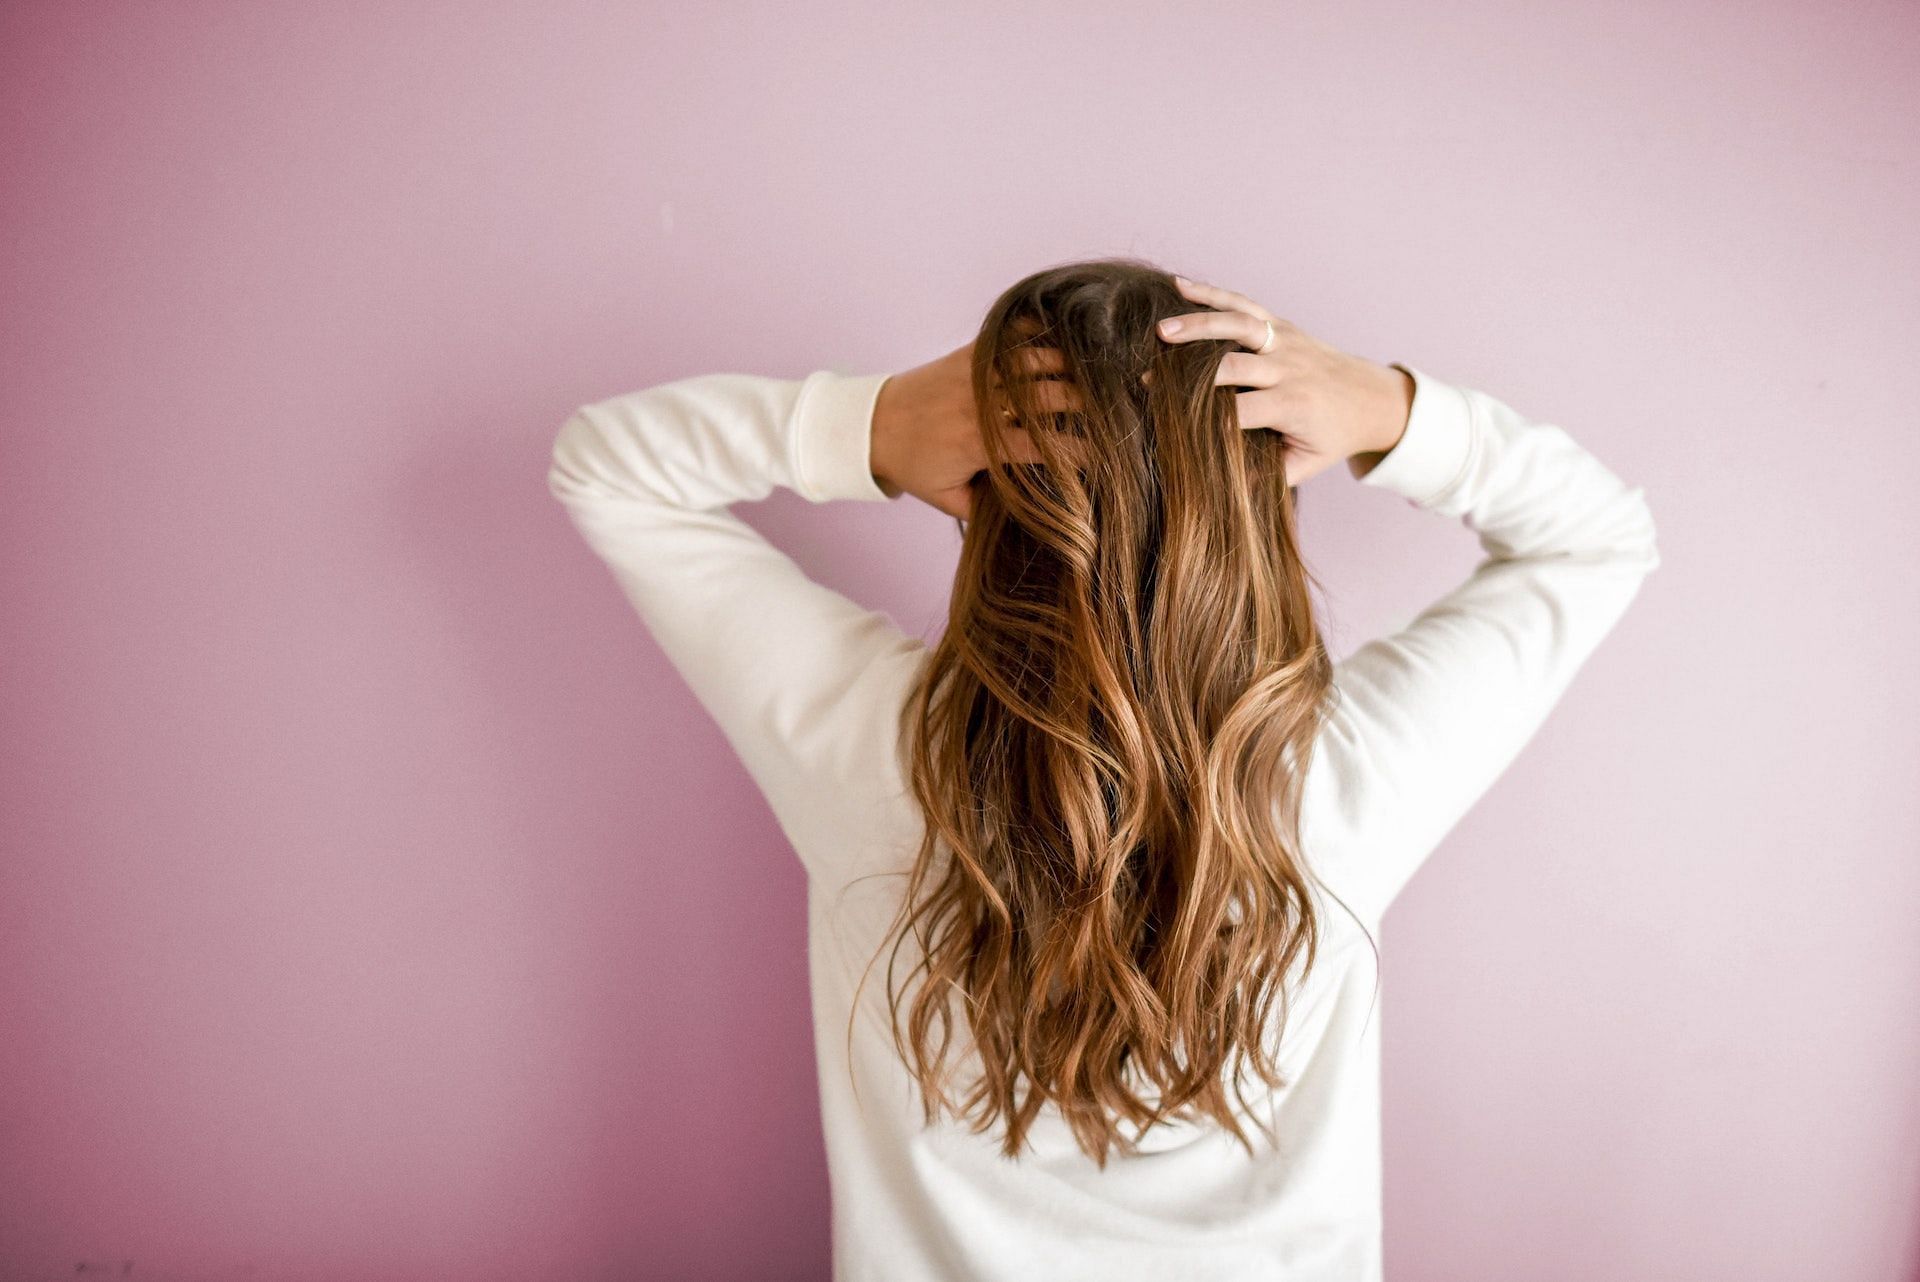 Sulfate-based shampoos strip off natural oils from hair. (Photo via Pexels/Element5 Digital)